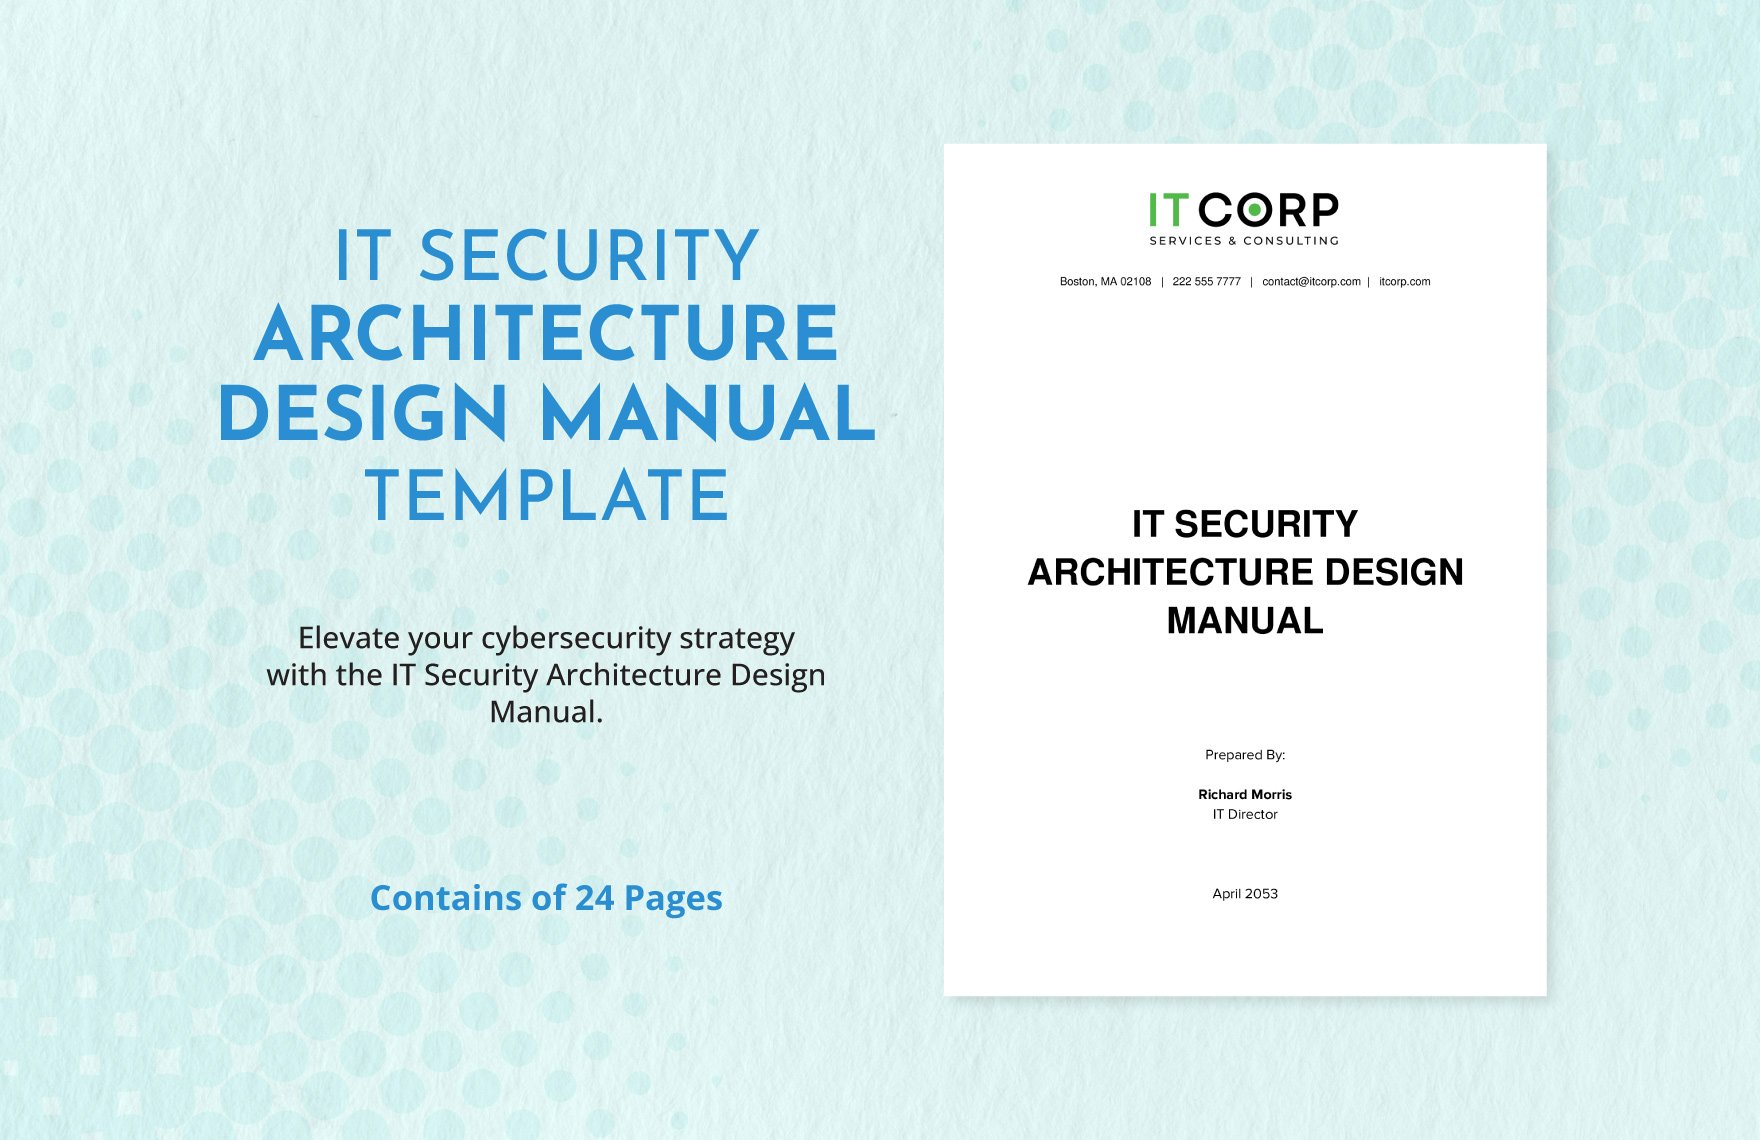 IT Security Architecture Design Manual Template in Word, Google Docs, PDF